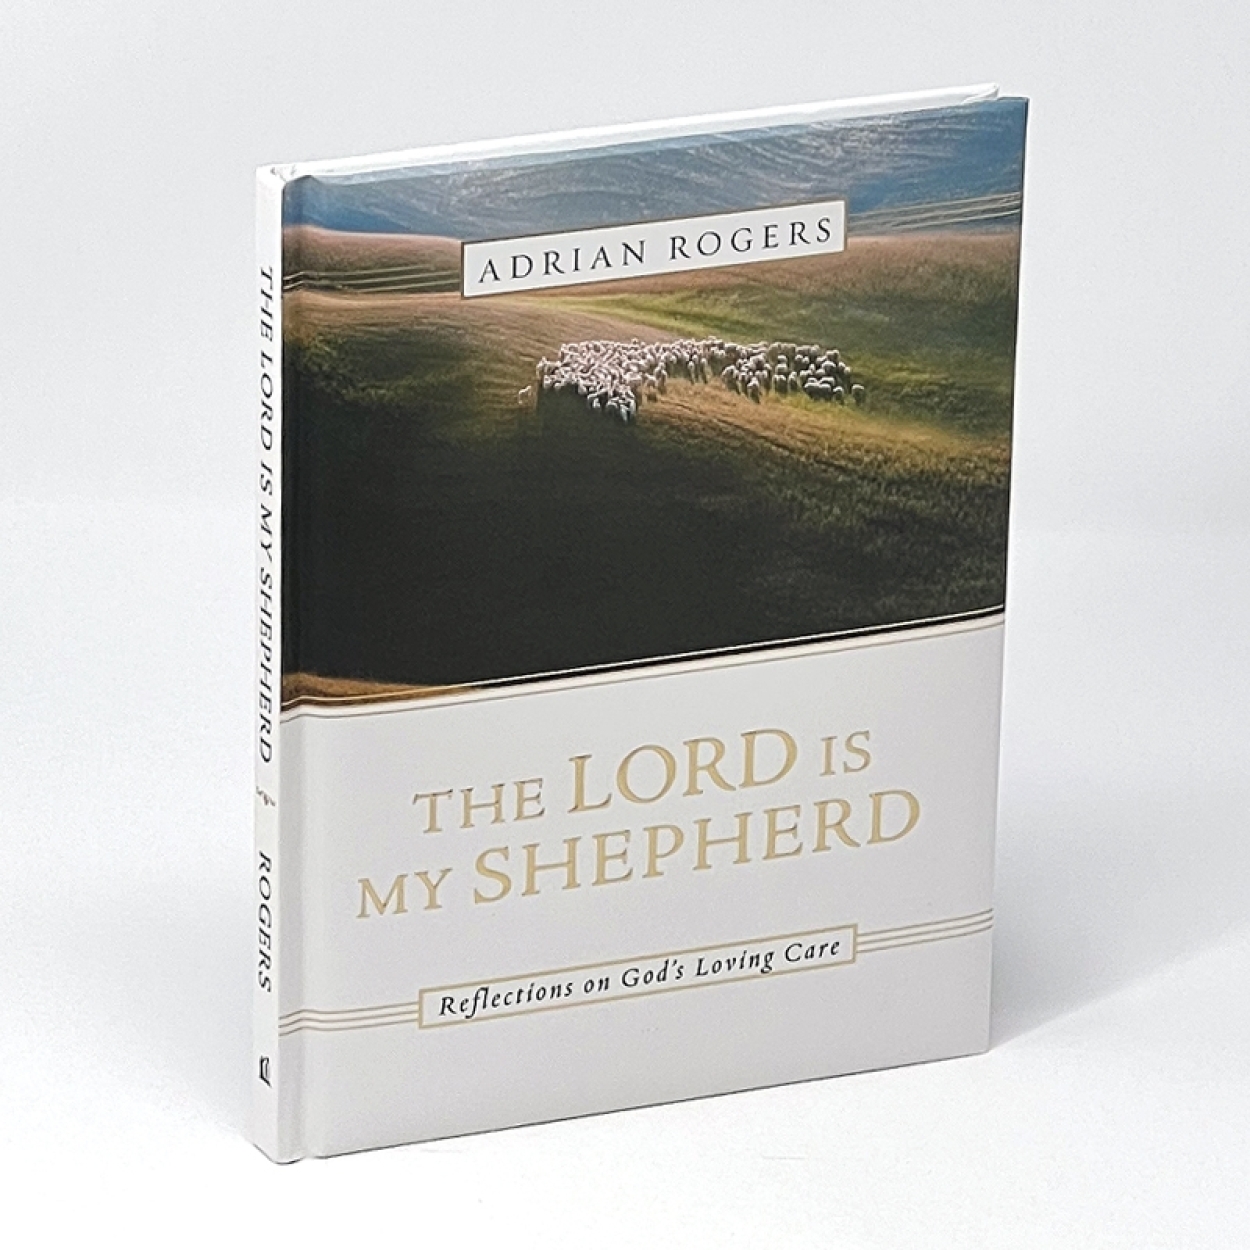 The lord is my shepherd book b107 store grid